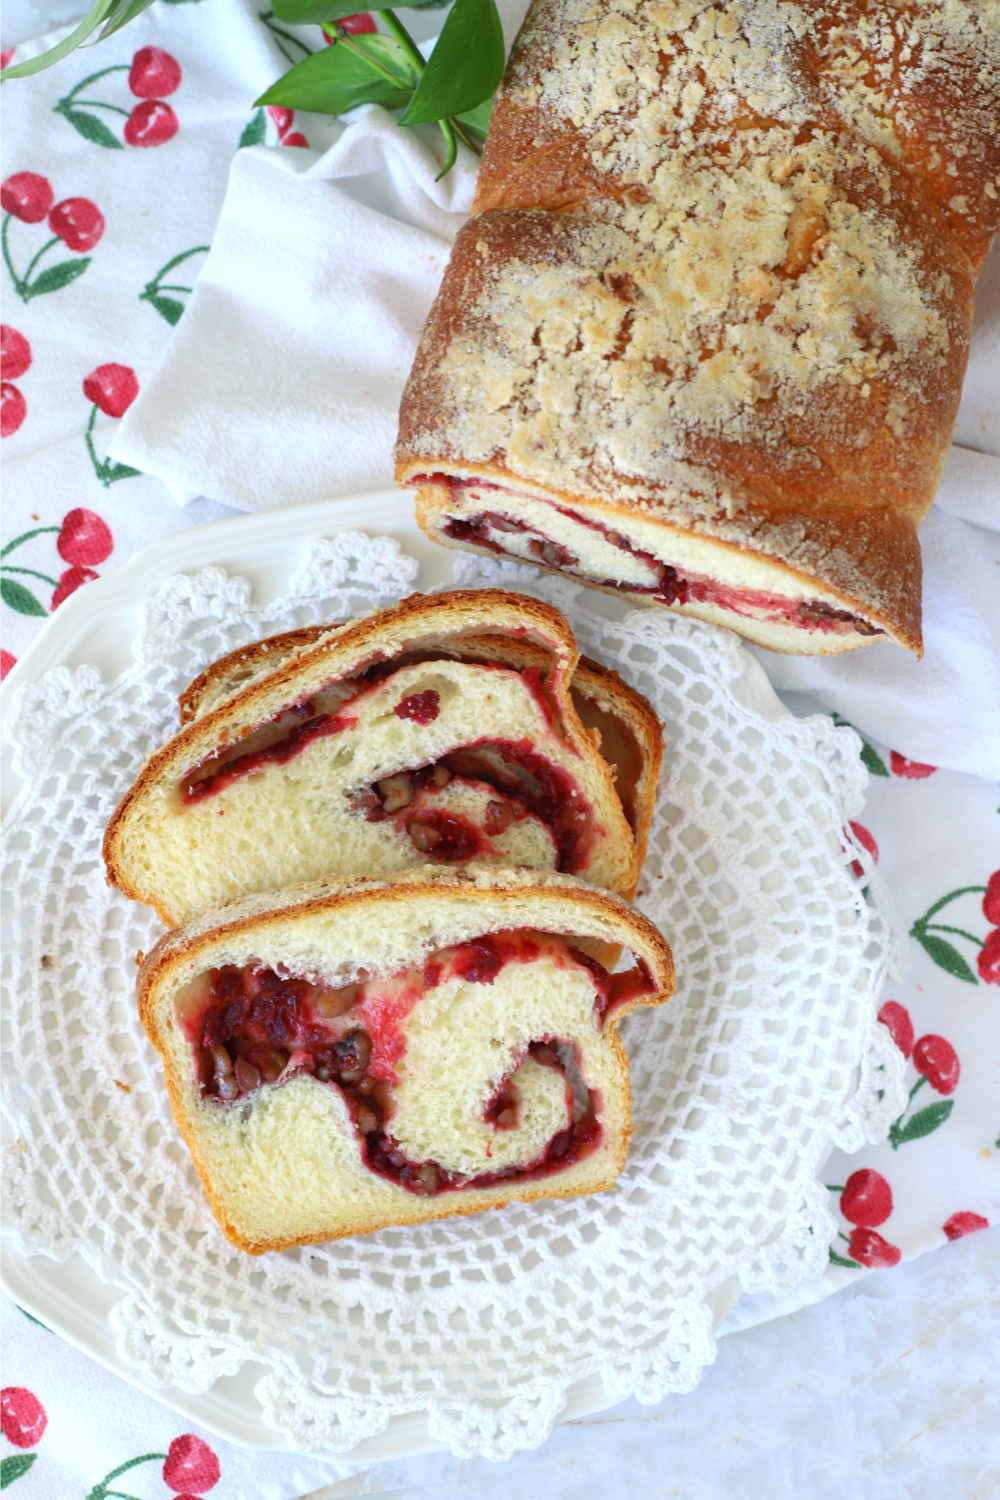 Easy recipe for a loaf of cranberry swirl bread with a pretty filling using fresh or frozen cranberries and walnuts or pecans. Yeast dough made with a bread machine or by hand. 